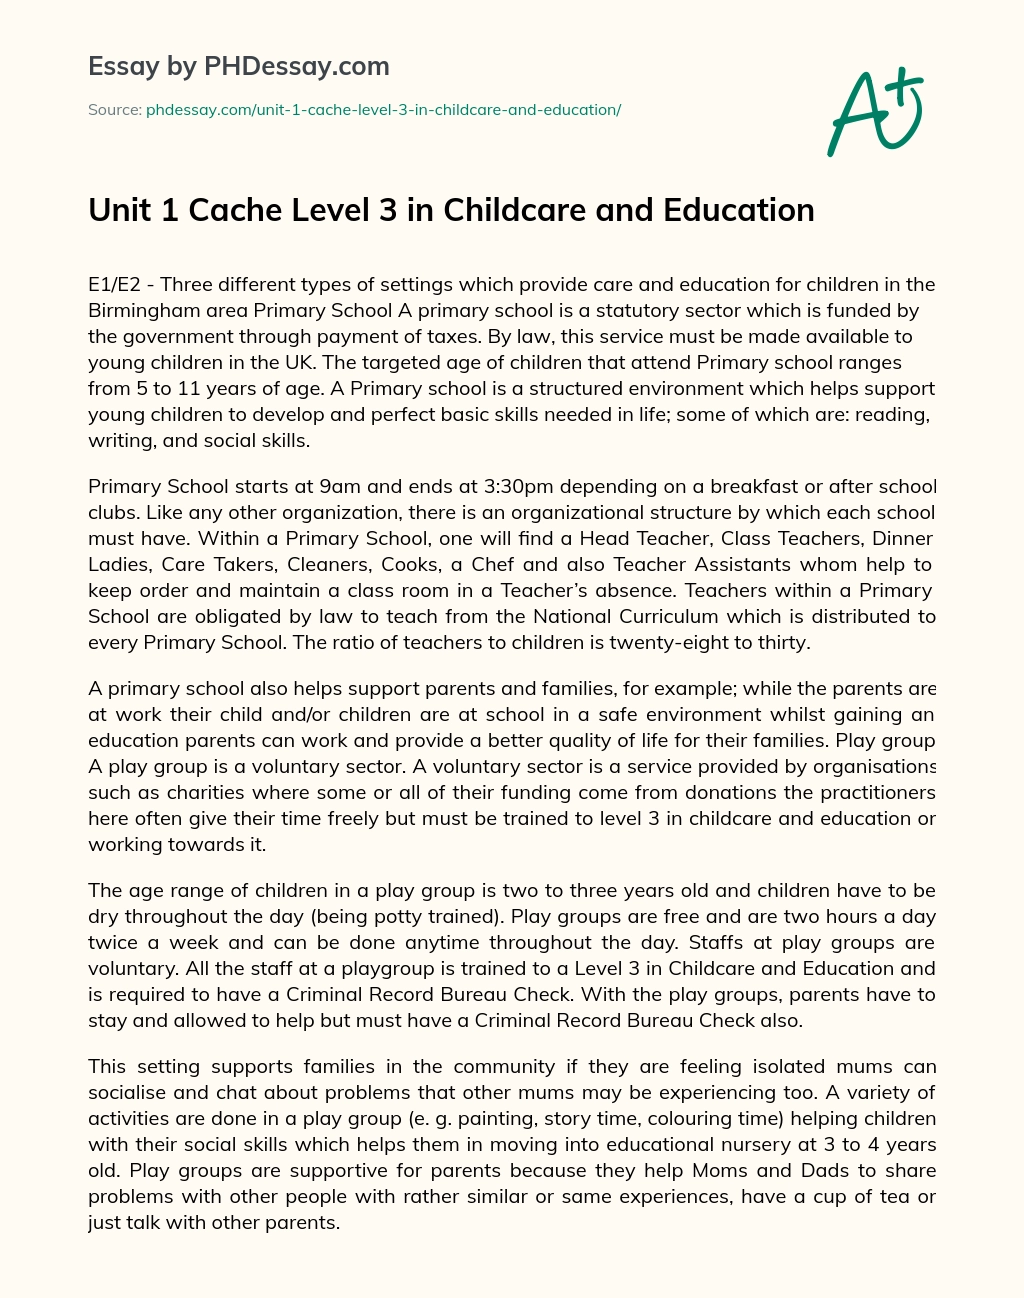 Childcare and Education essay